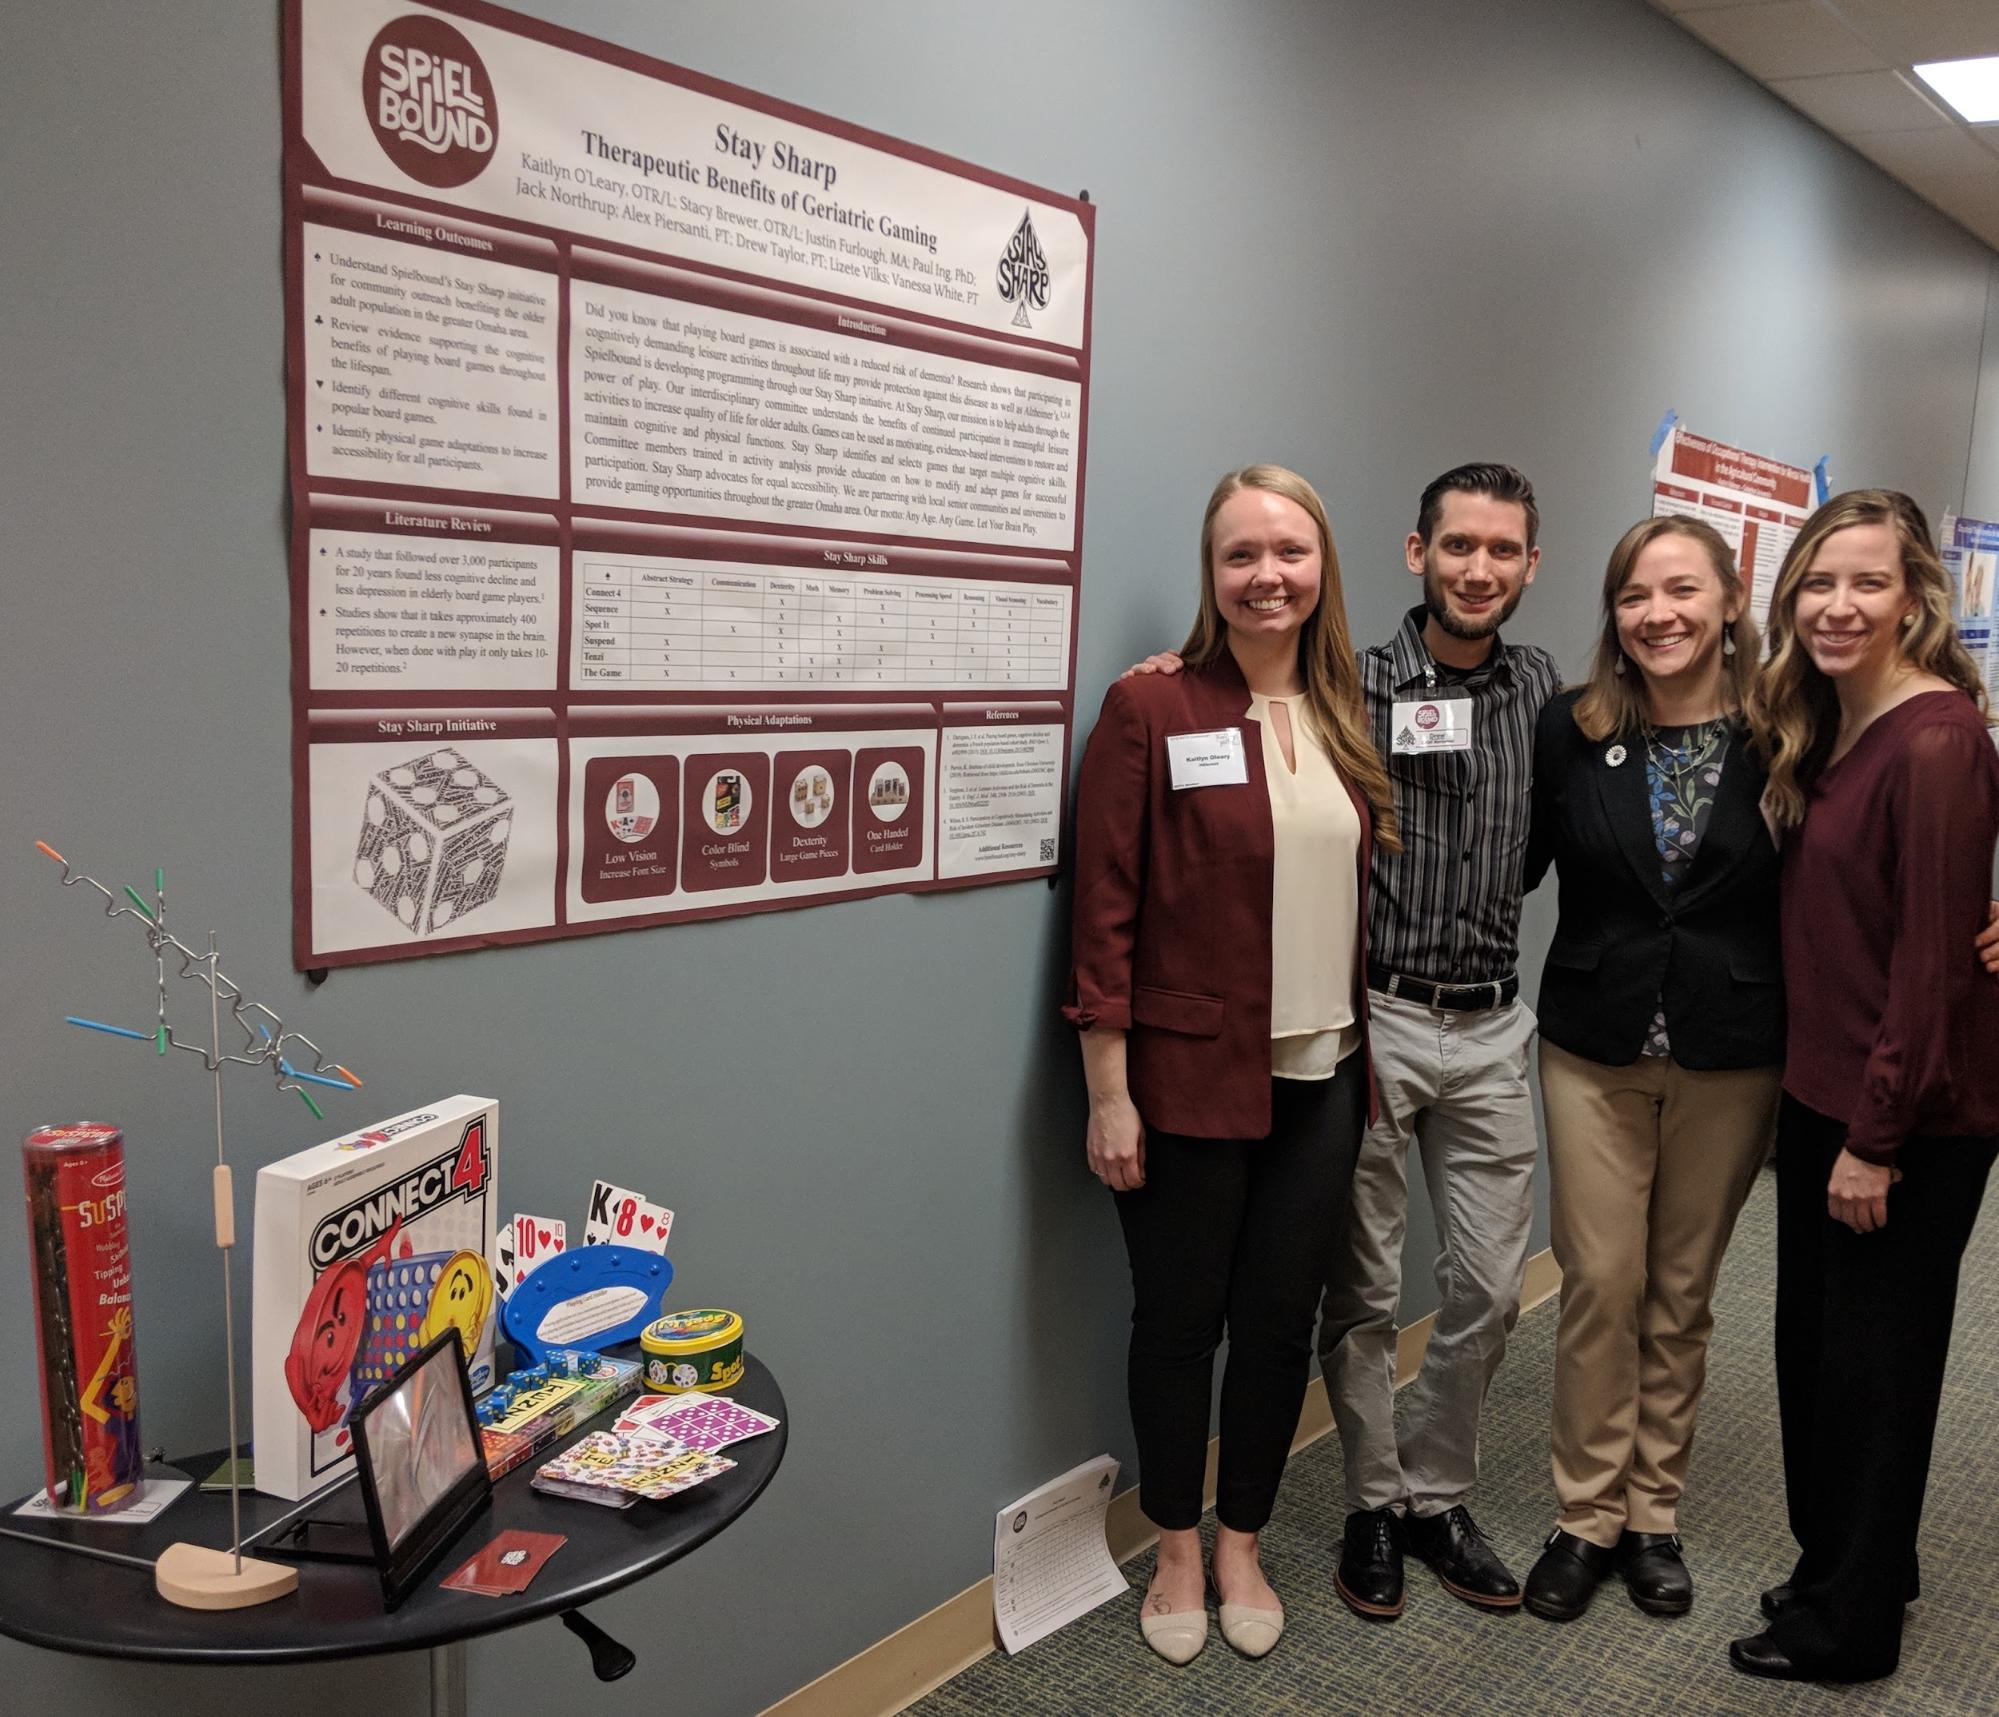 Stay Sharp committee members presented on the therapeutic benefits of geriatric gaming at the 2019 Nebraska Occupational Therapy Conference.